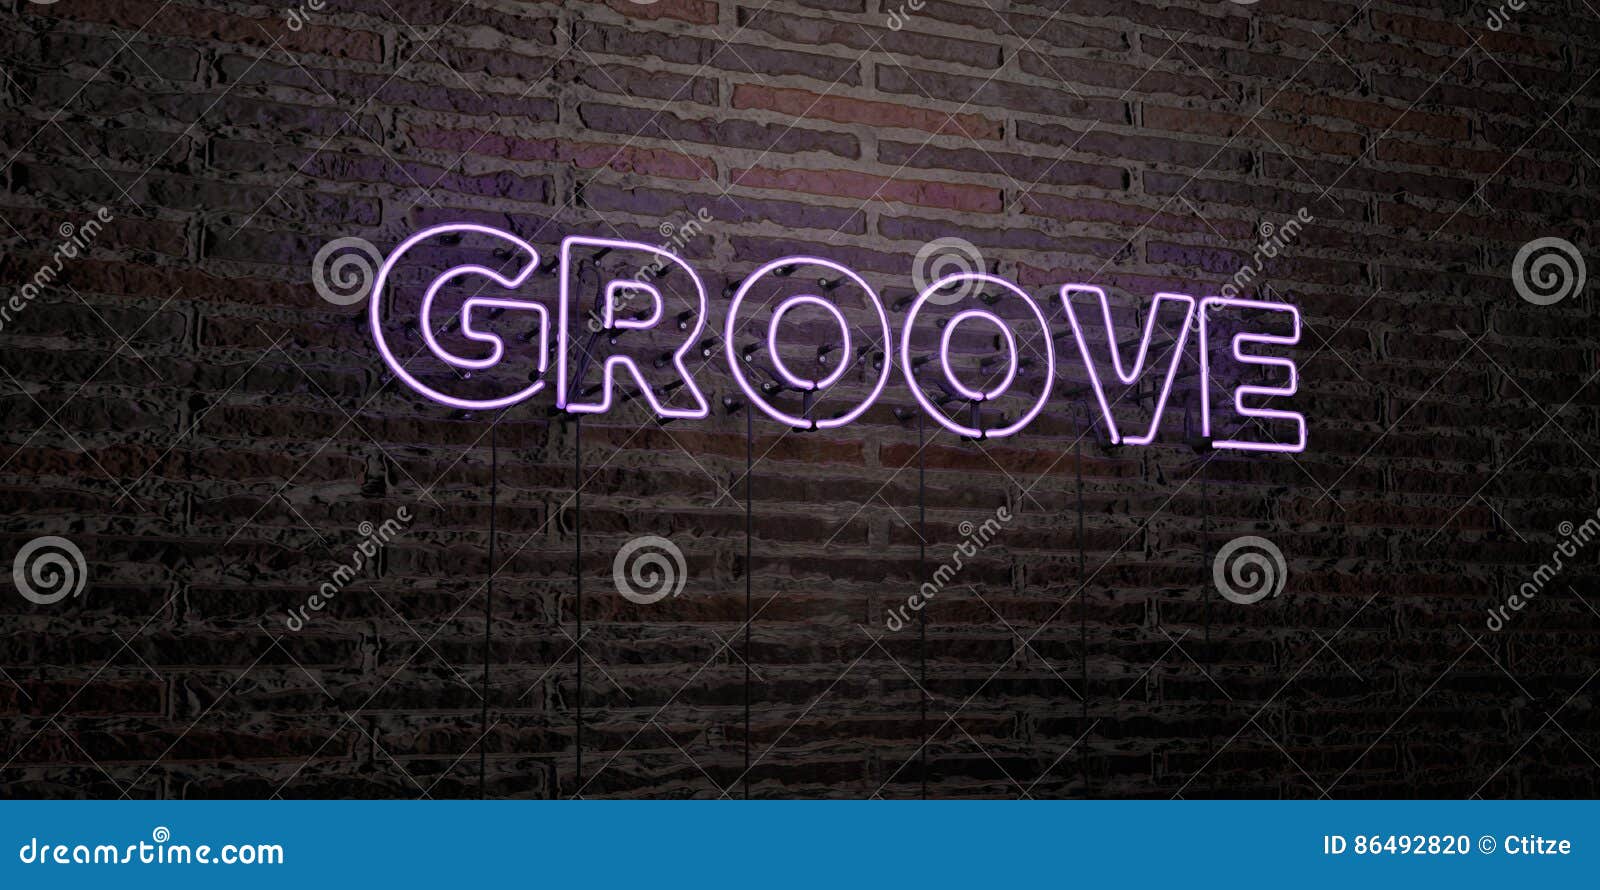 https://thumbs.dreamstime.com/z/groove-realistic-neon-sign-brick-wall-background-d-rendered-royalty-free-stock-image-can-be-used-online-banner-ads-86492820.jpg